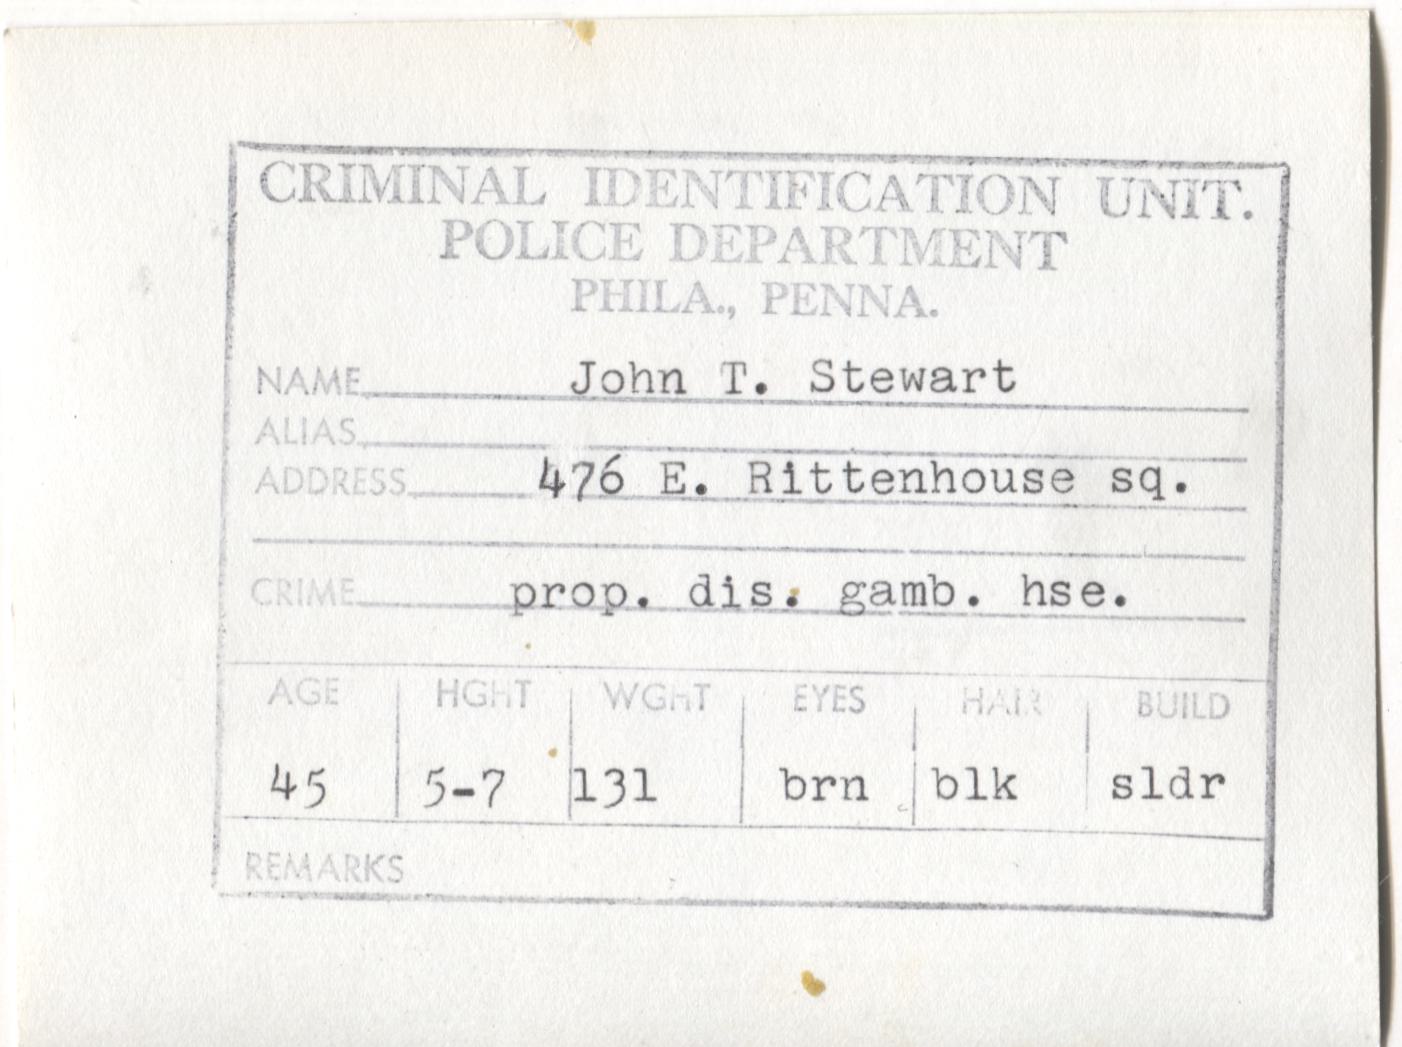 John T. Stewart Mugshot - Arrested on 12/10/1962 for Being a Proprietor of a Disorderly Gambling House